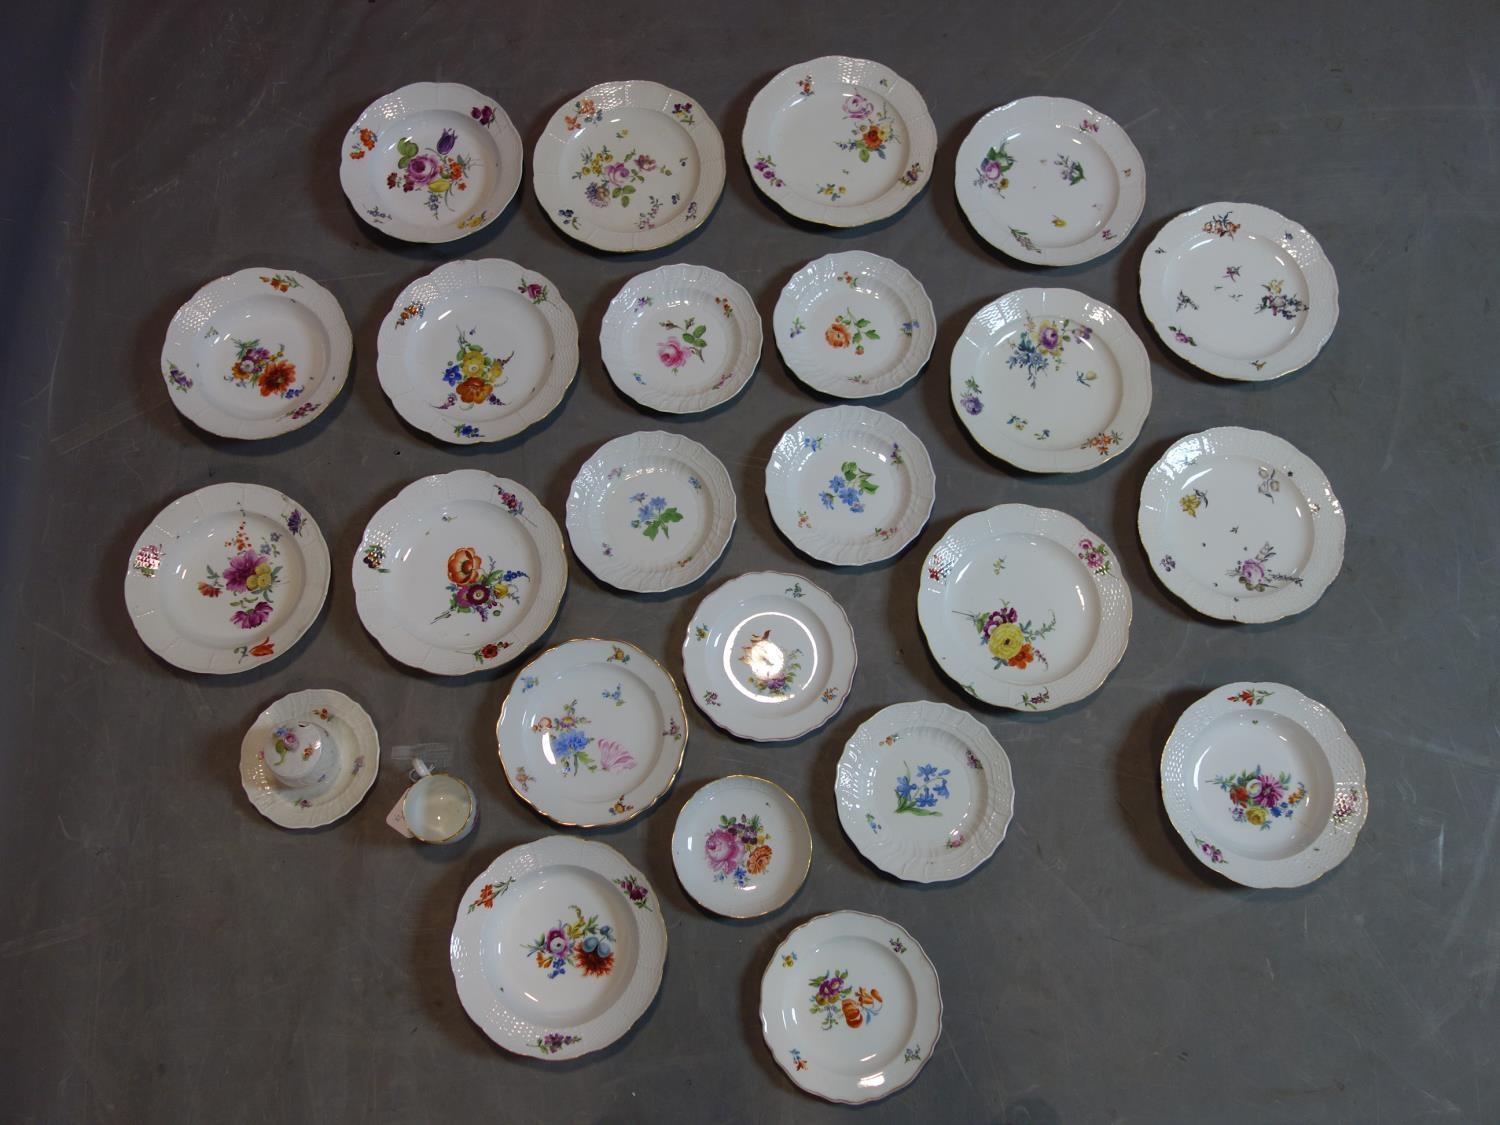 A collection of Meissen porcelain to include 23 plates, a cup and a sugar pot